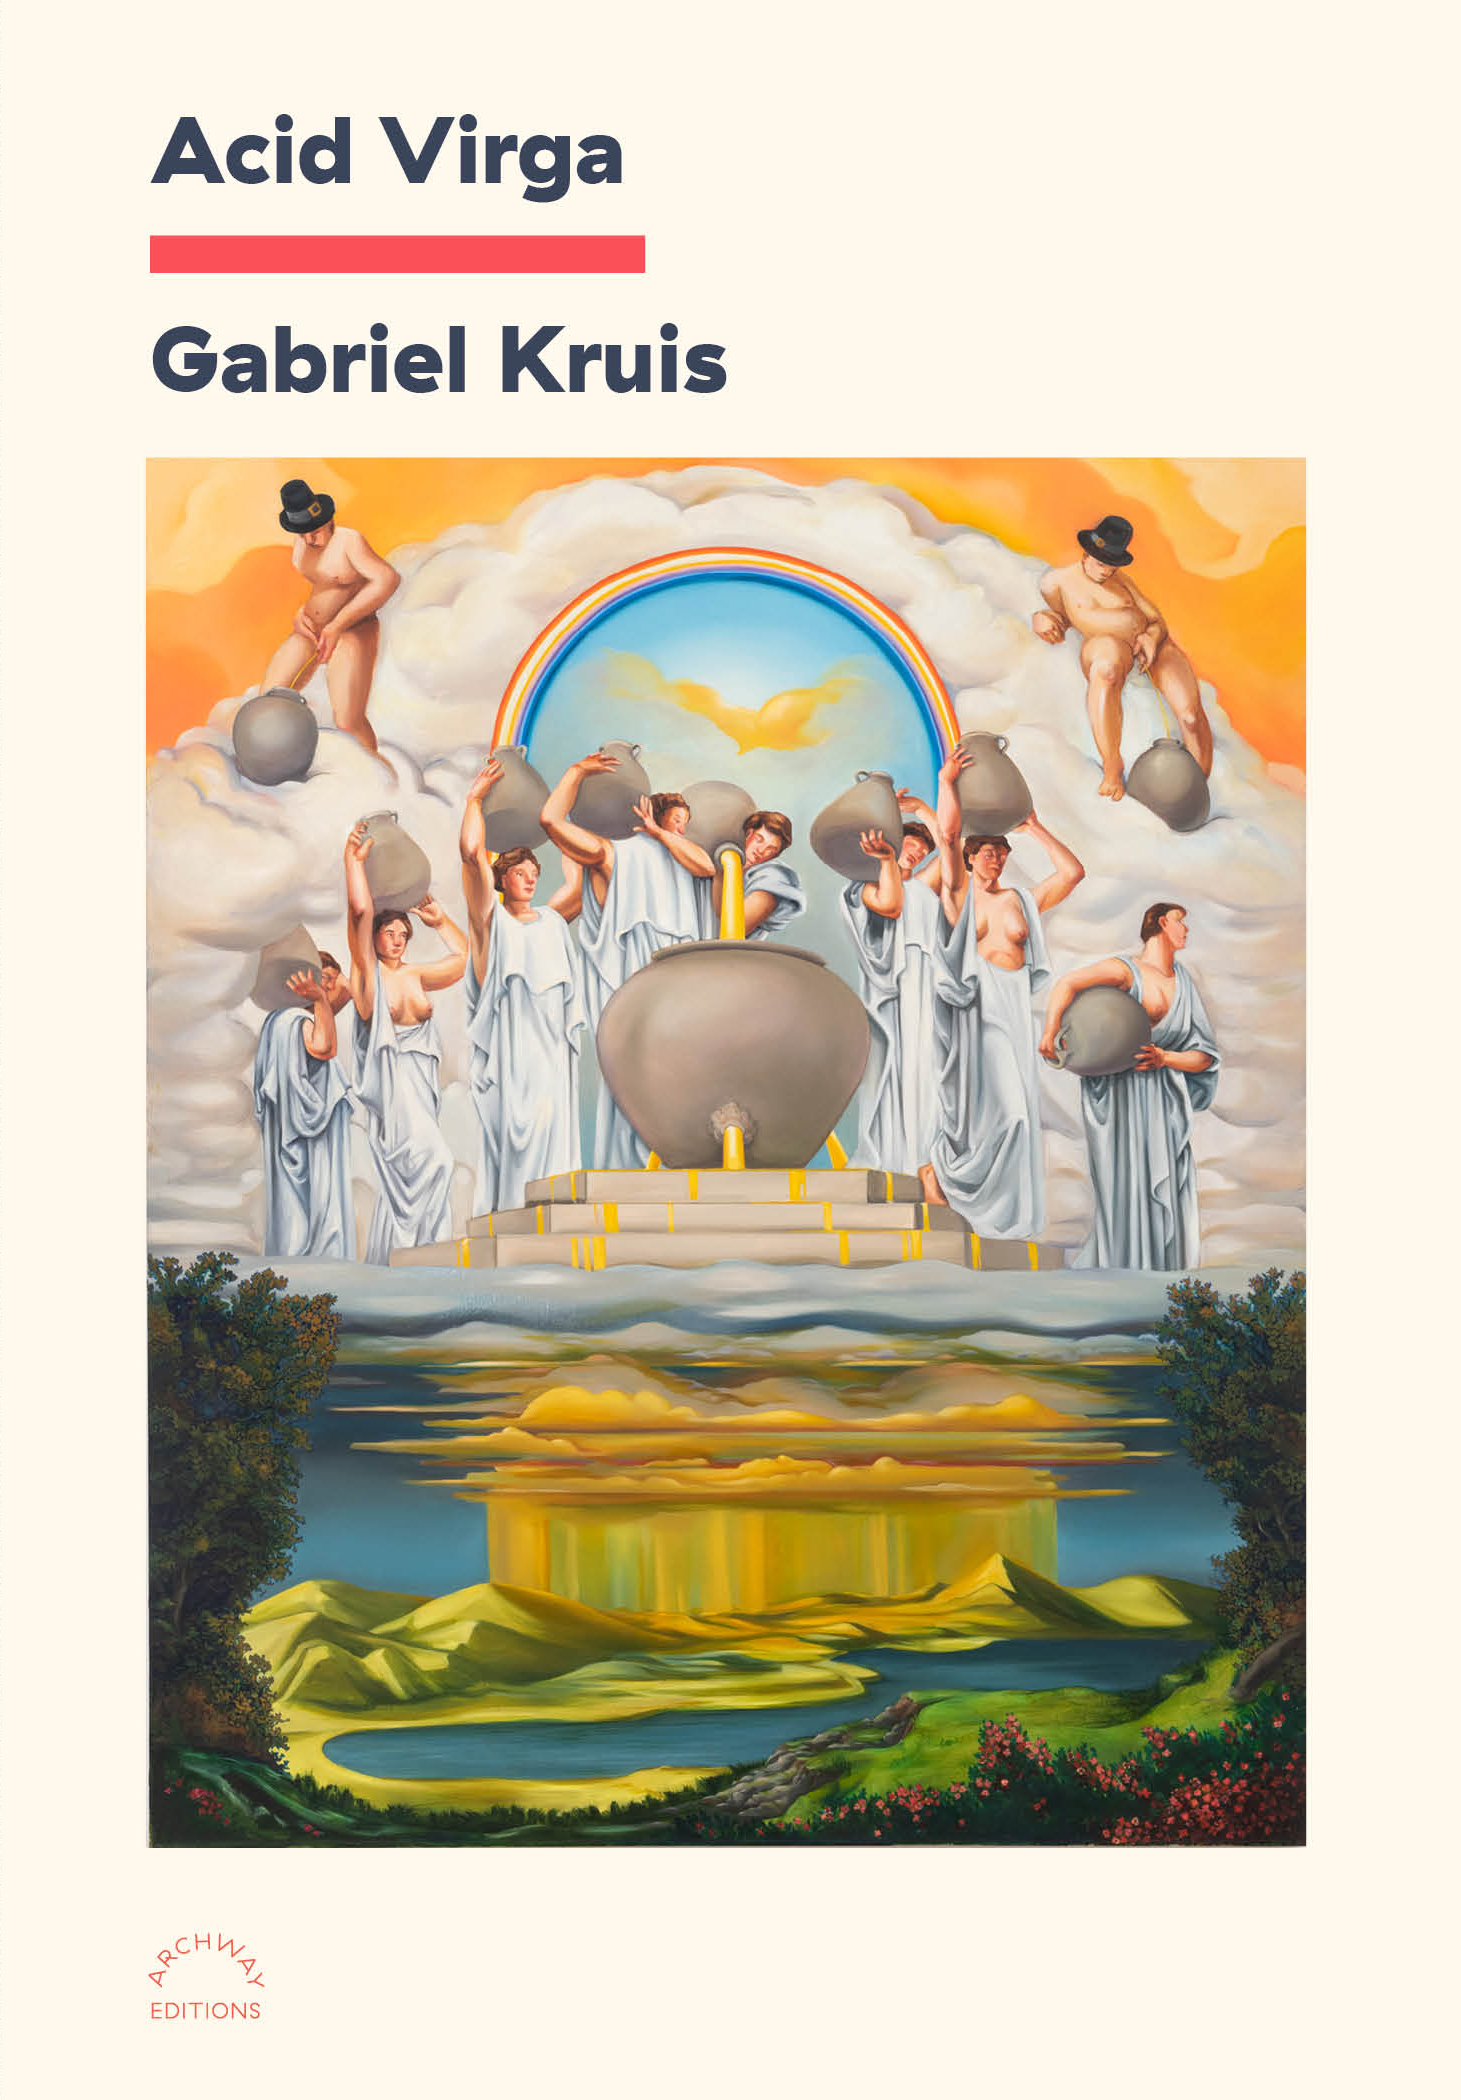 ARCHWAY EDITIONS presents the virtual book launch for ACID VIRGA by Gabriel Kruis live at the Park Church Co-op with Dorothea Lasky, Adjua Gargi Nzinga Greaves, Benjamin Krusling, MacGregor Card, and Tidal Channel